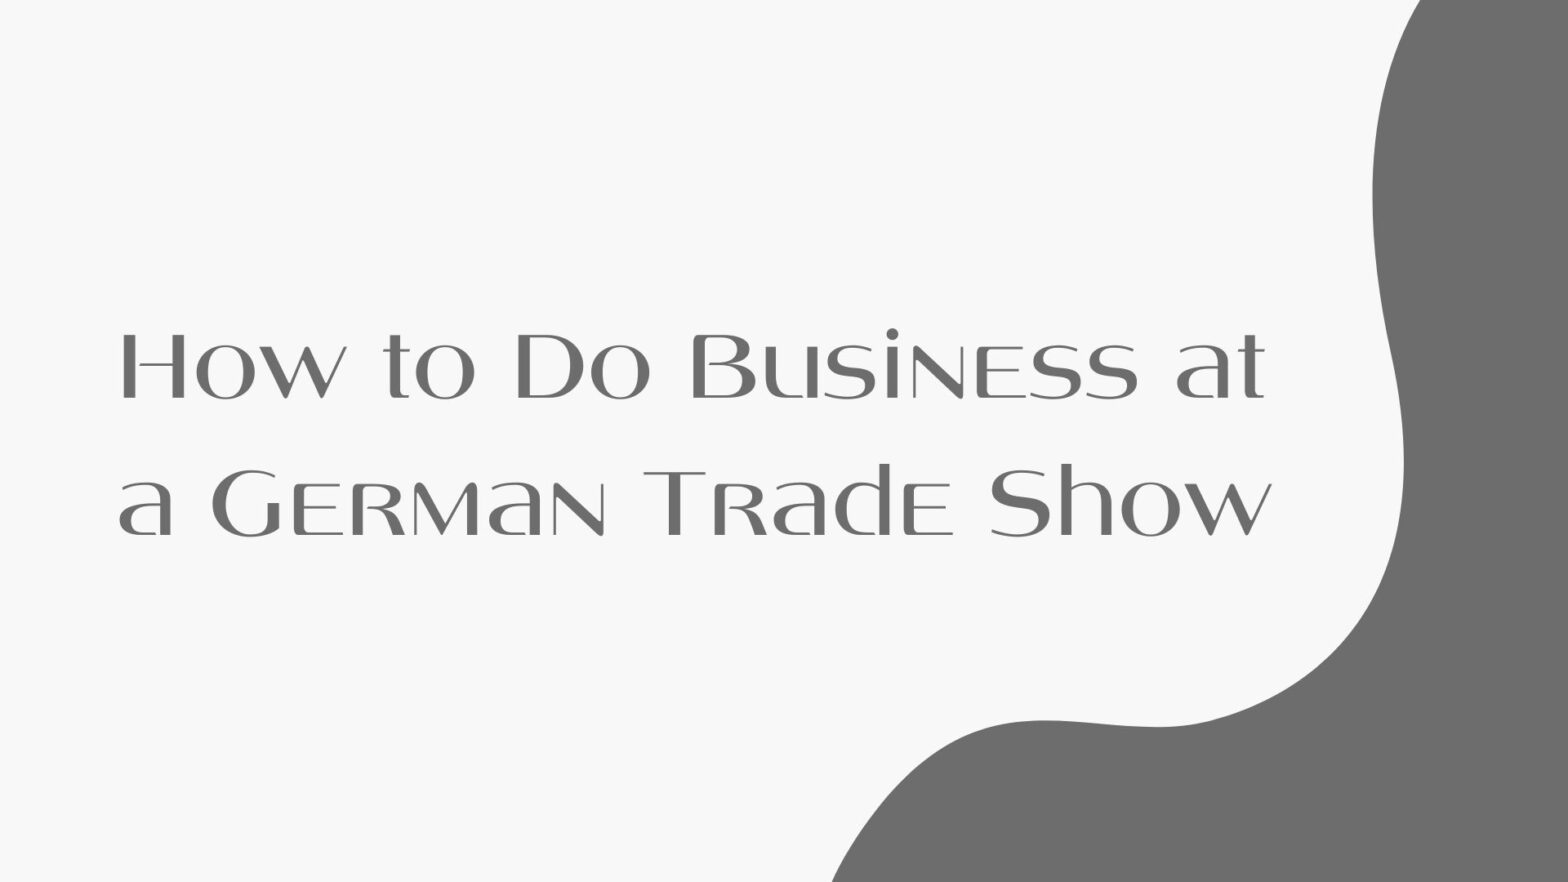 How to do business at a German trade show